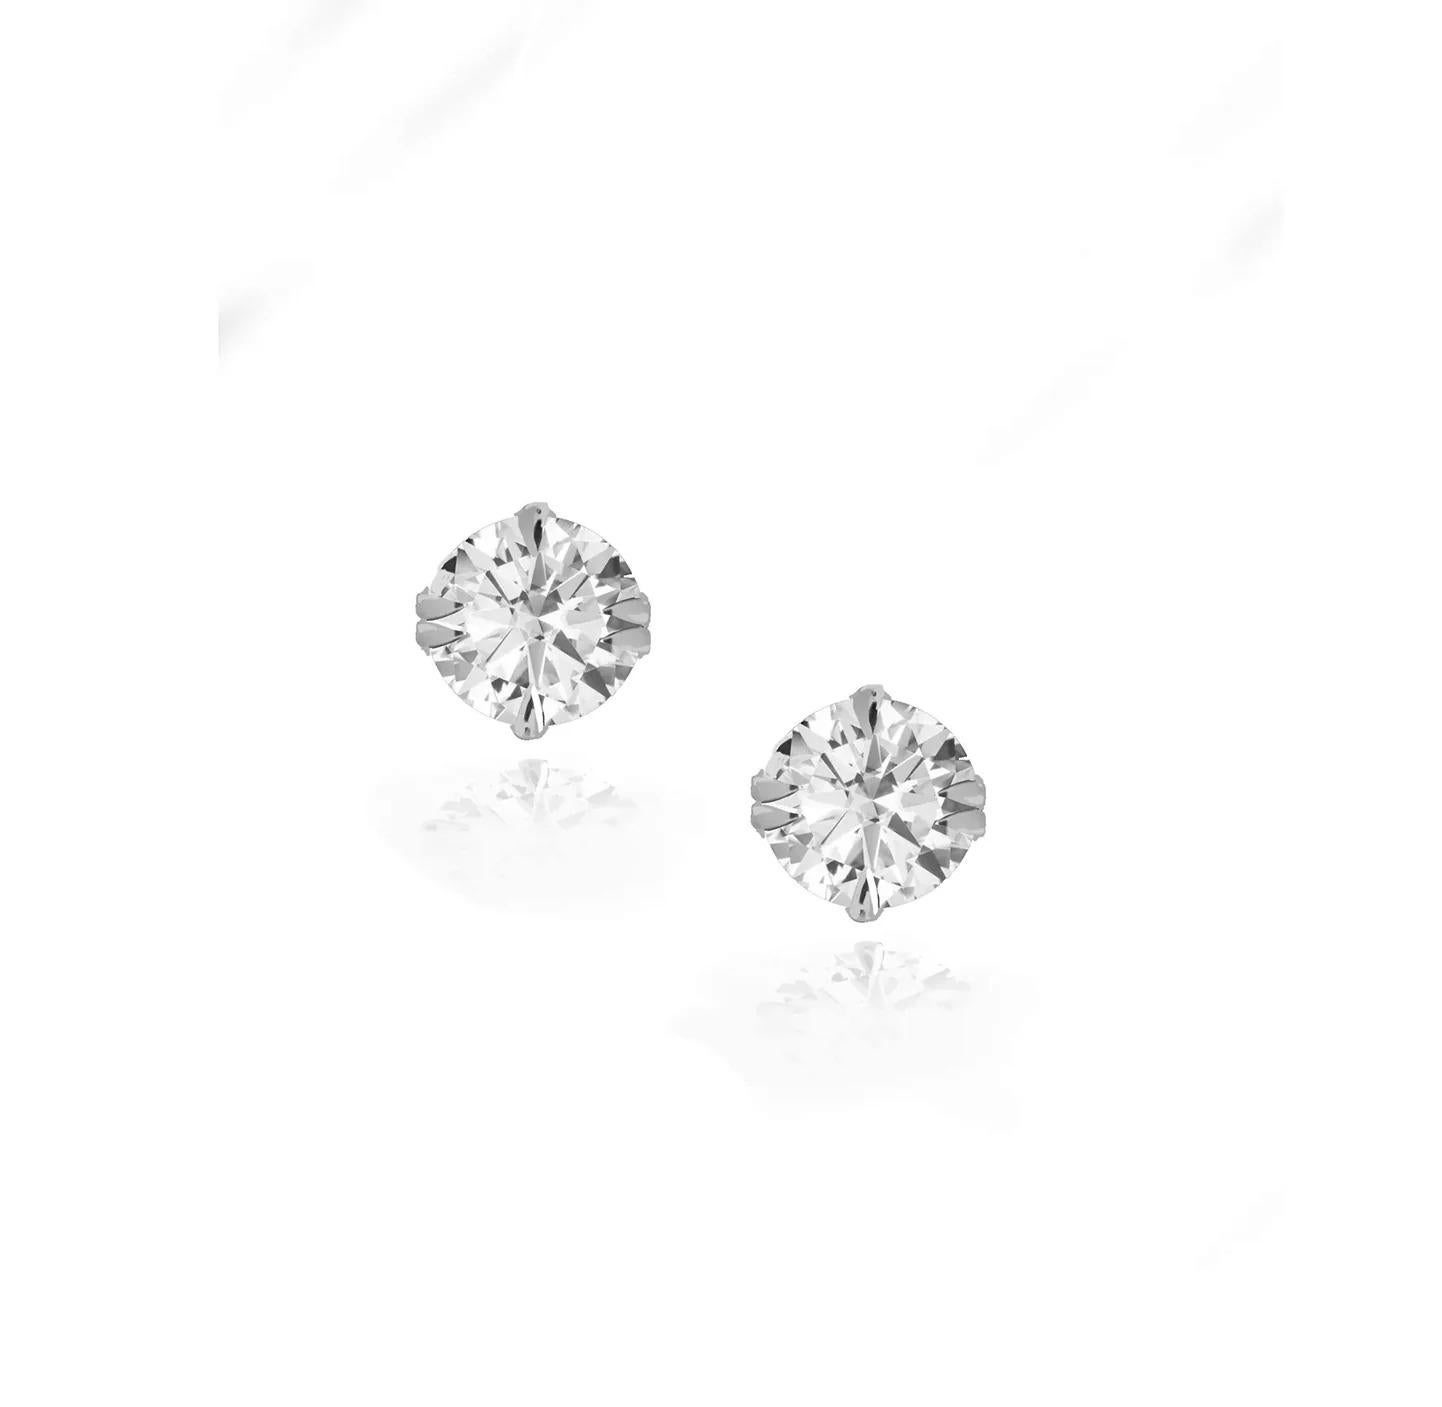 Bold Icon studs featuring a high quality pair of white diamonds in our signature fierce talons.

Pair of 0.30ct diamonds. = 0.60ct total

Ethically sourced natural diamonds

Ethically sourced gold

Featuring a pair  F/GSI grade white diamonds

18ct